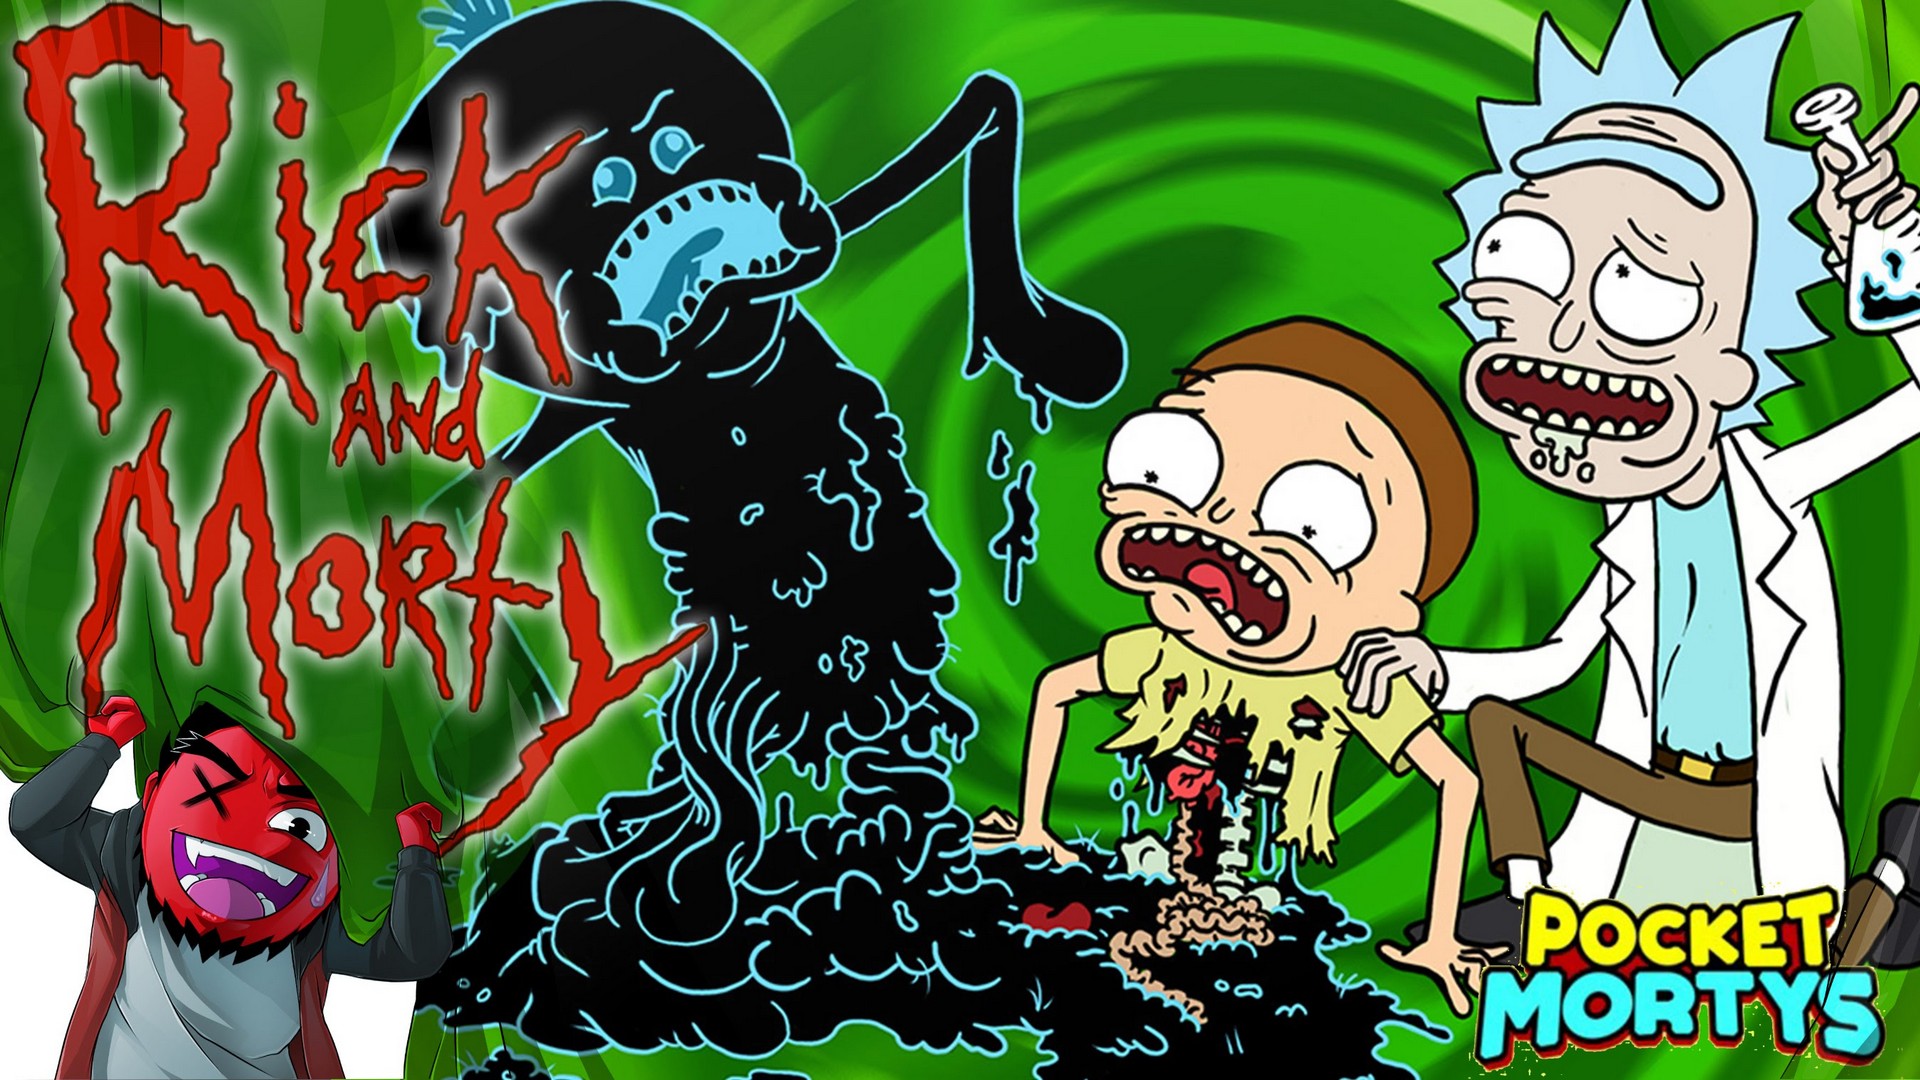 Rick and Morty Wallpaper For Desktop with resolution 1920X1080 pixel. You can use this wallpaper as background for your desktop Computer Screensavers, Android or iPhone smartphones